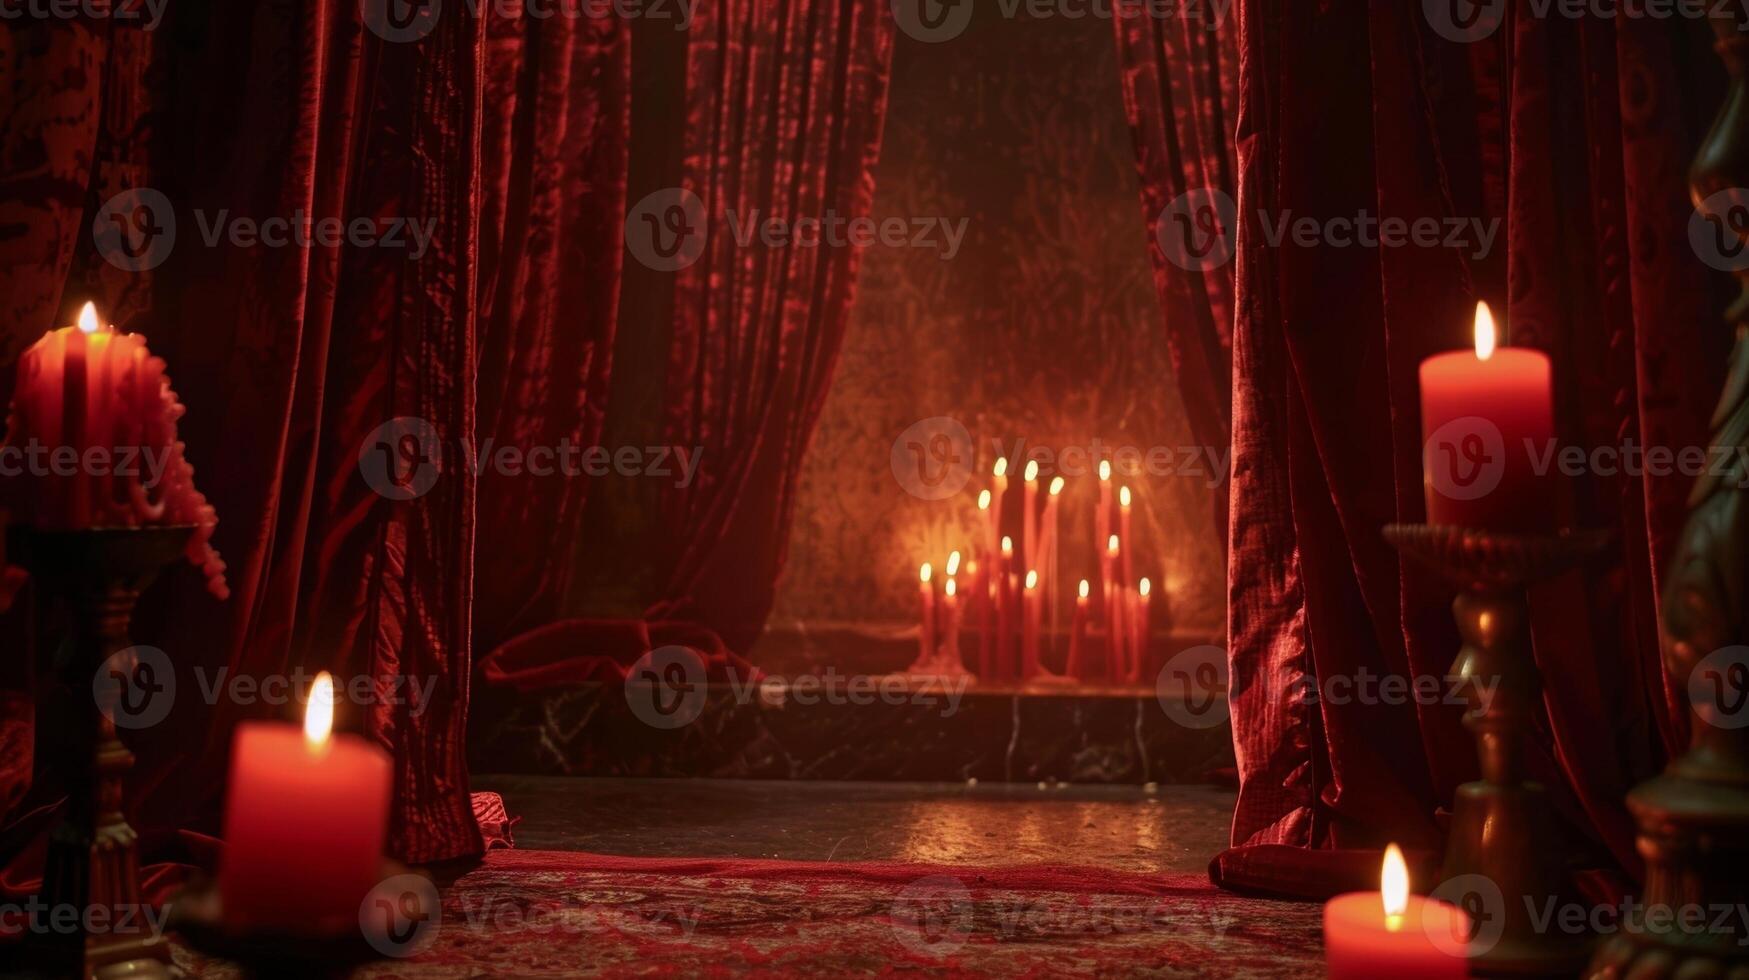 Deep red velvet curtains framing the candlelit scene adding a touch of richness and romance. 2d flat cartoon photo